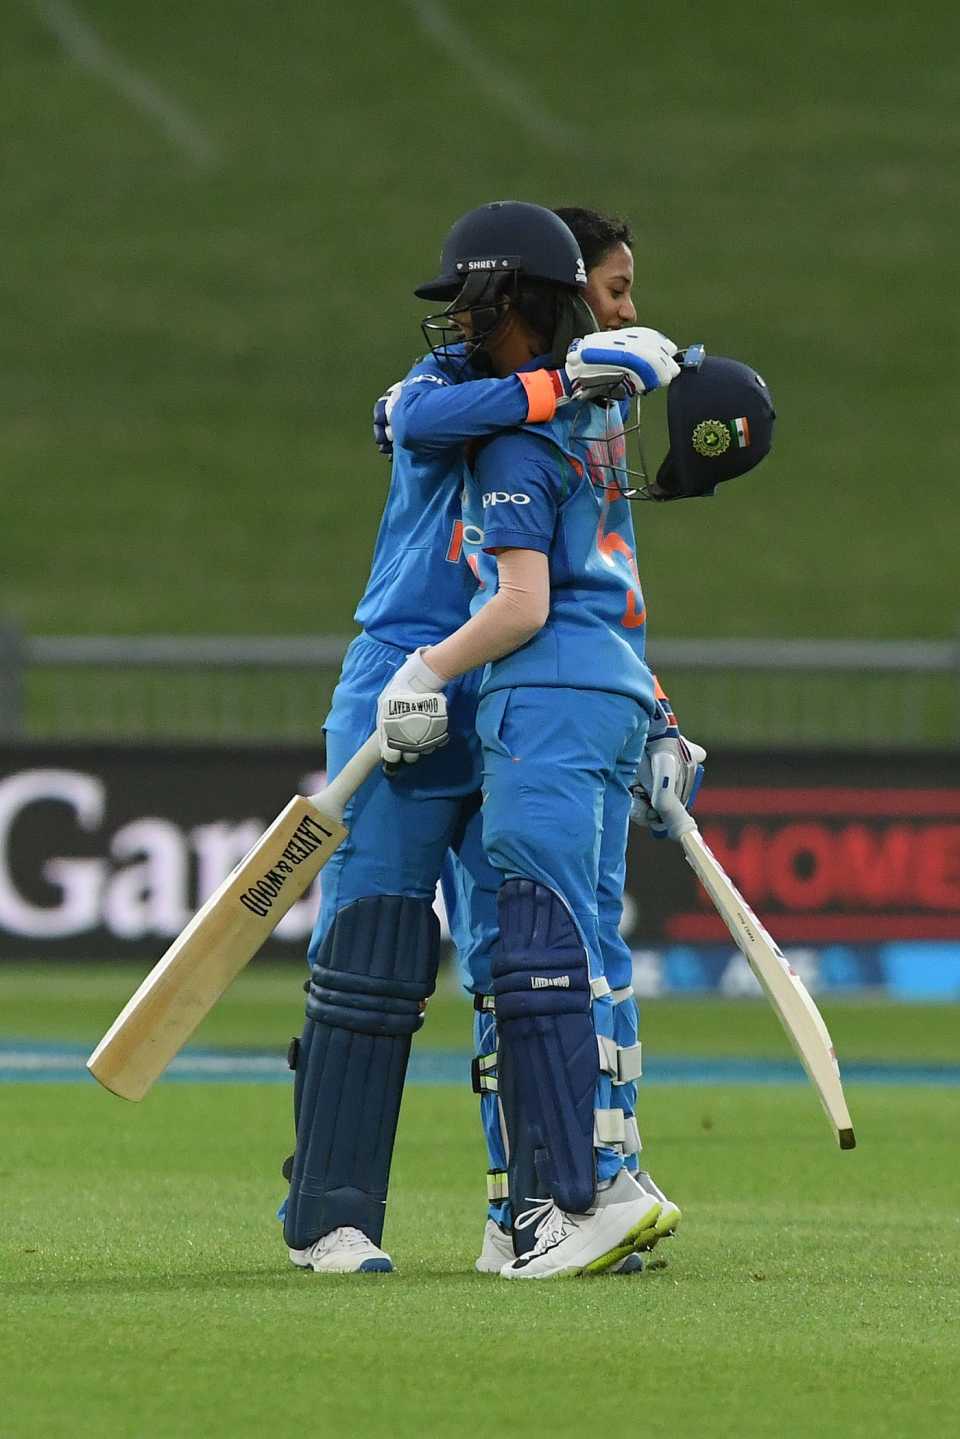 Mandhana and Rodrigues added 190 runs for the first wicket